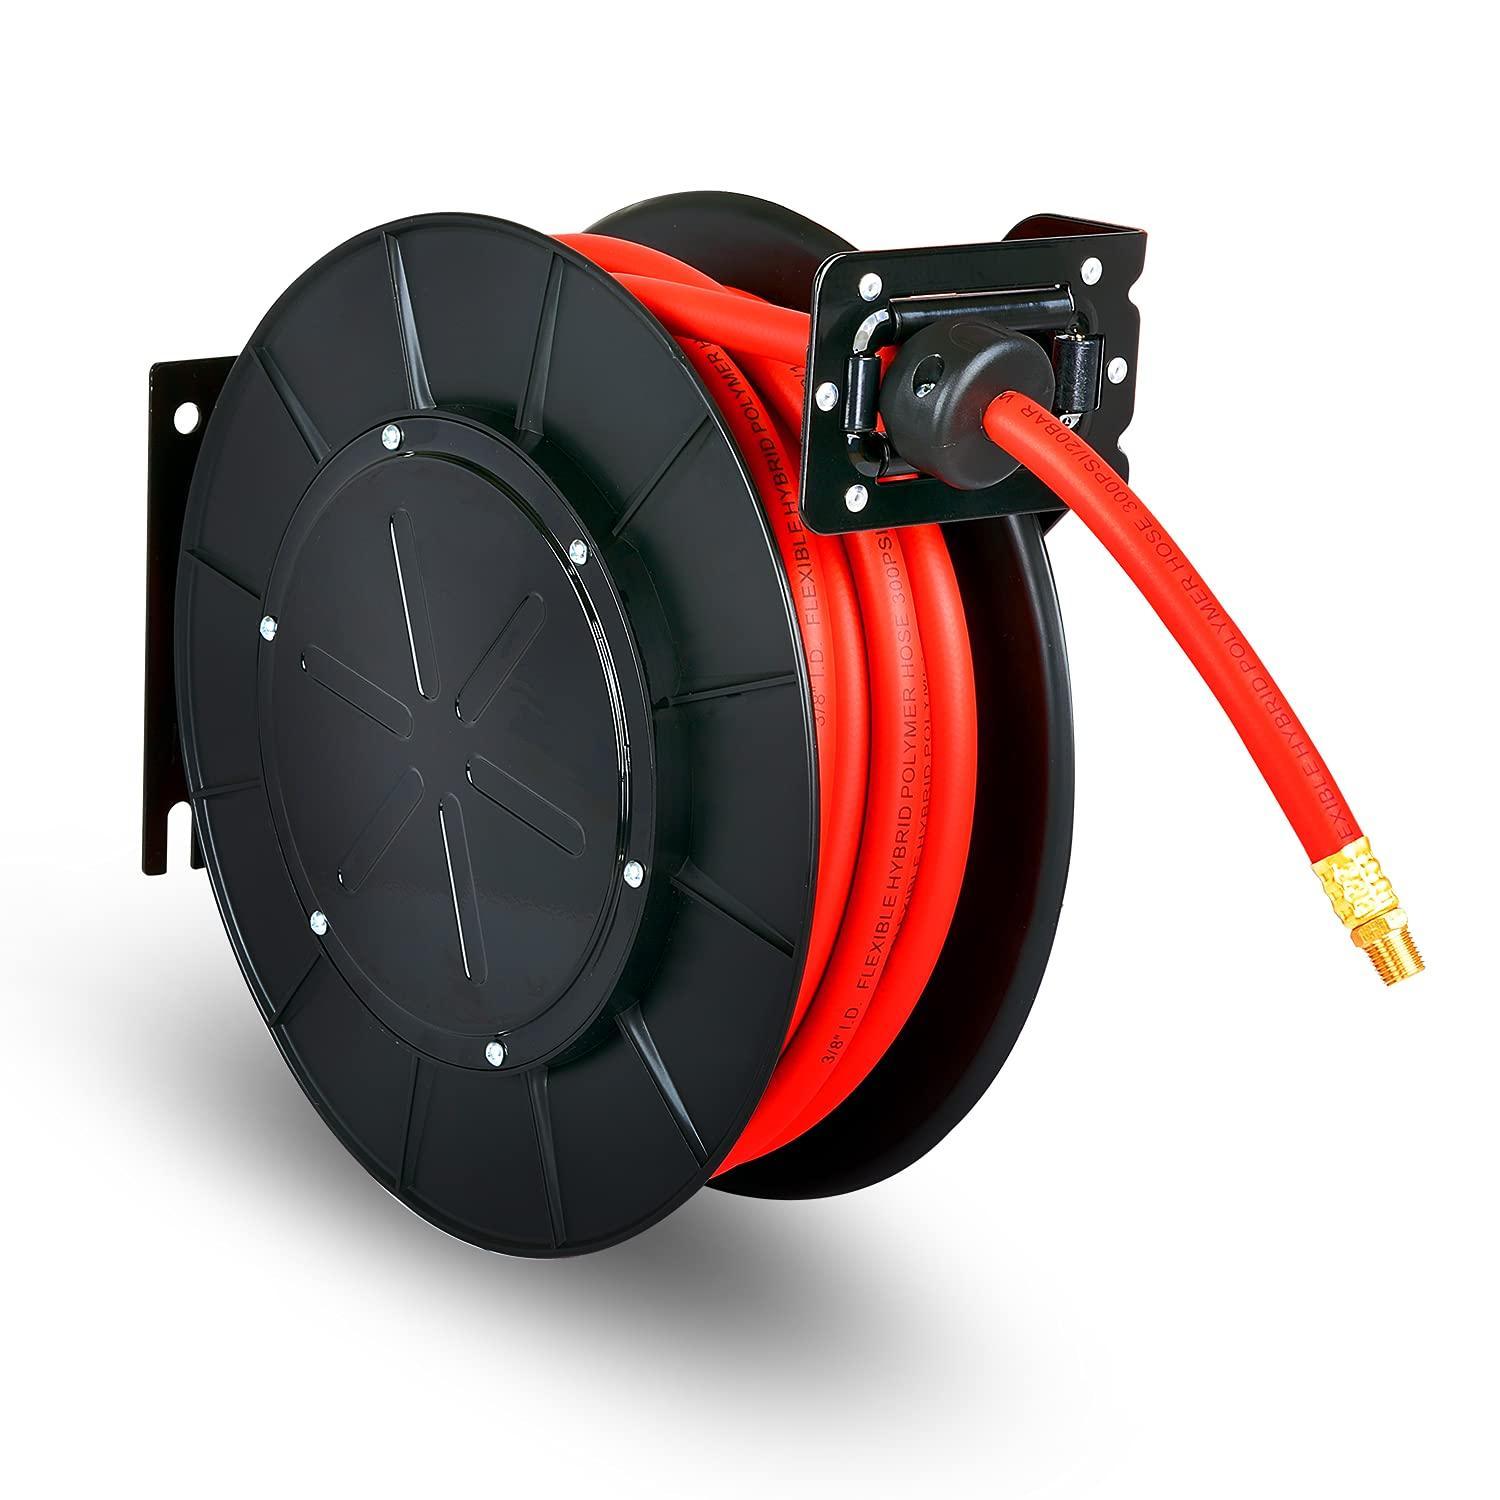 ReelWorks Industrial Retractable Air Hose Reel - 3/8" x  50'FT, 1/4" NPT Connections, Single Arm - DIY Tools by GreatCircleUS